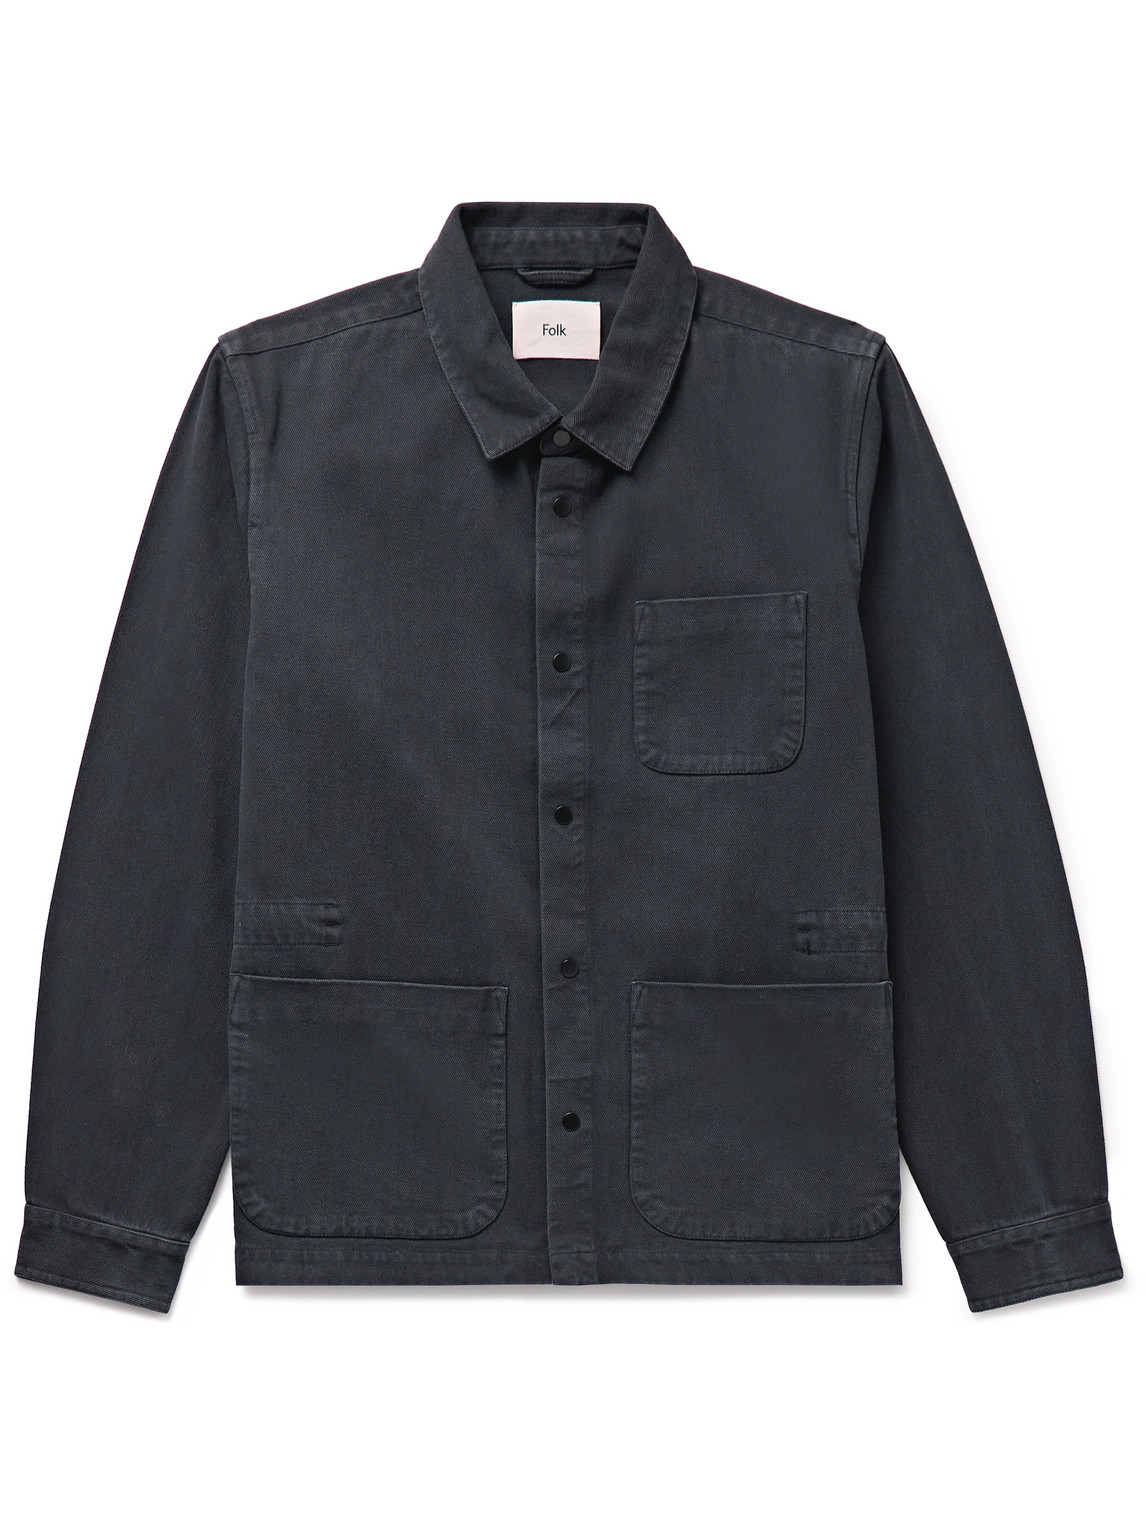 Folk Assembly Cotton-twill Overshirt In Black